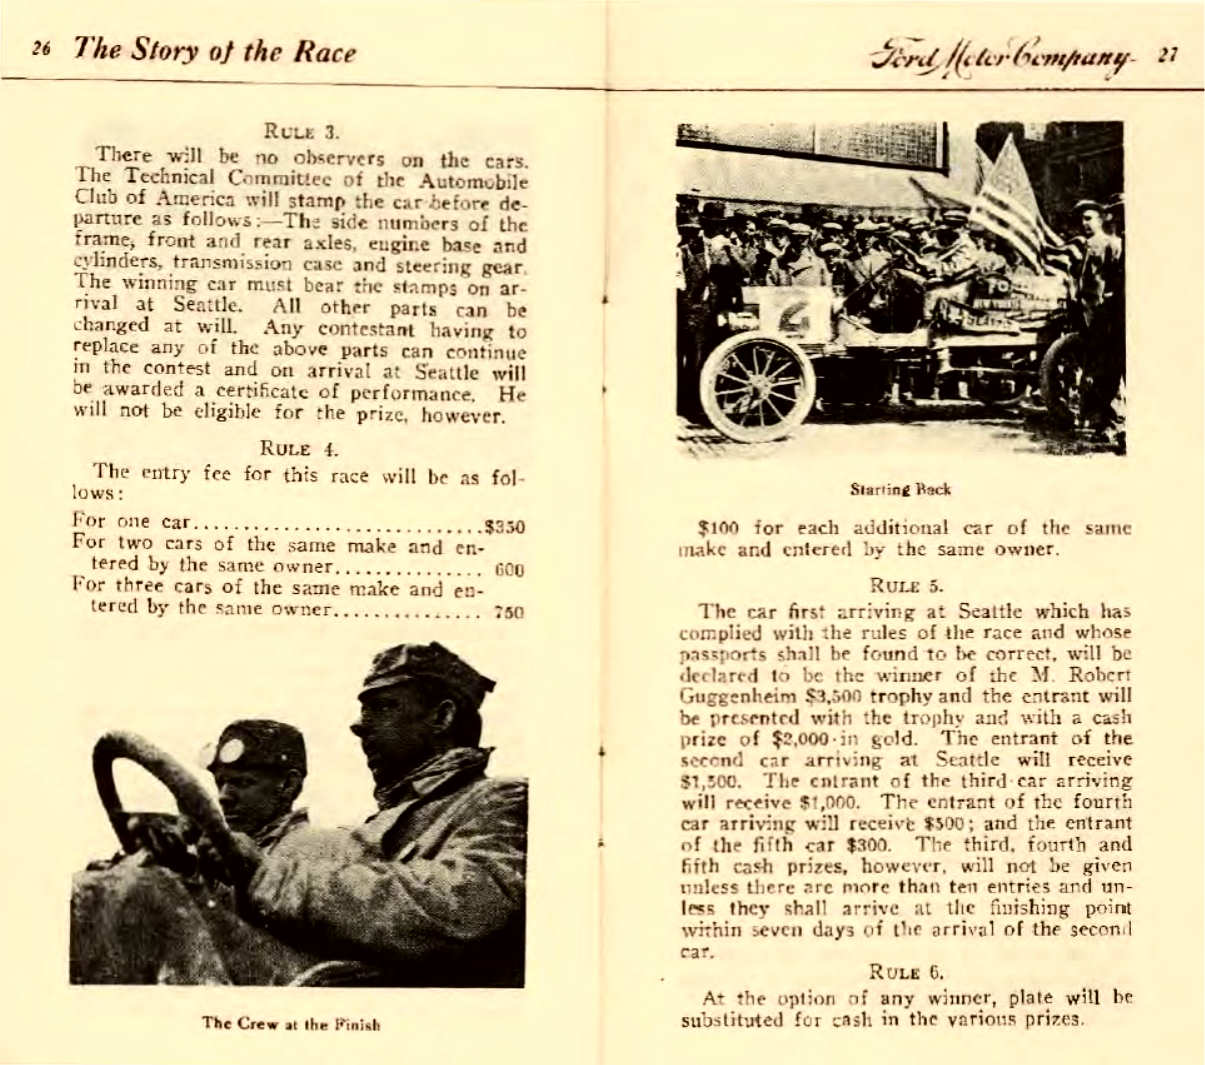 1909_Ford-The_Great_Race-26-27